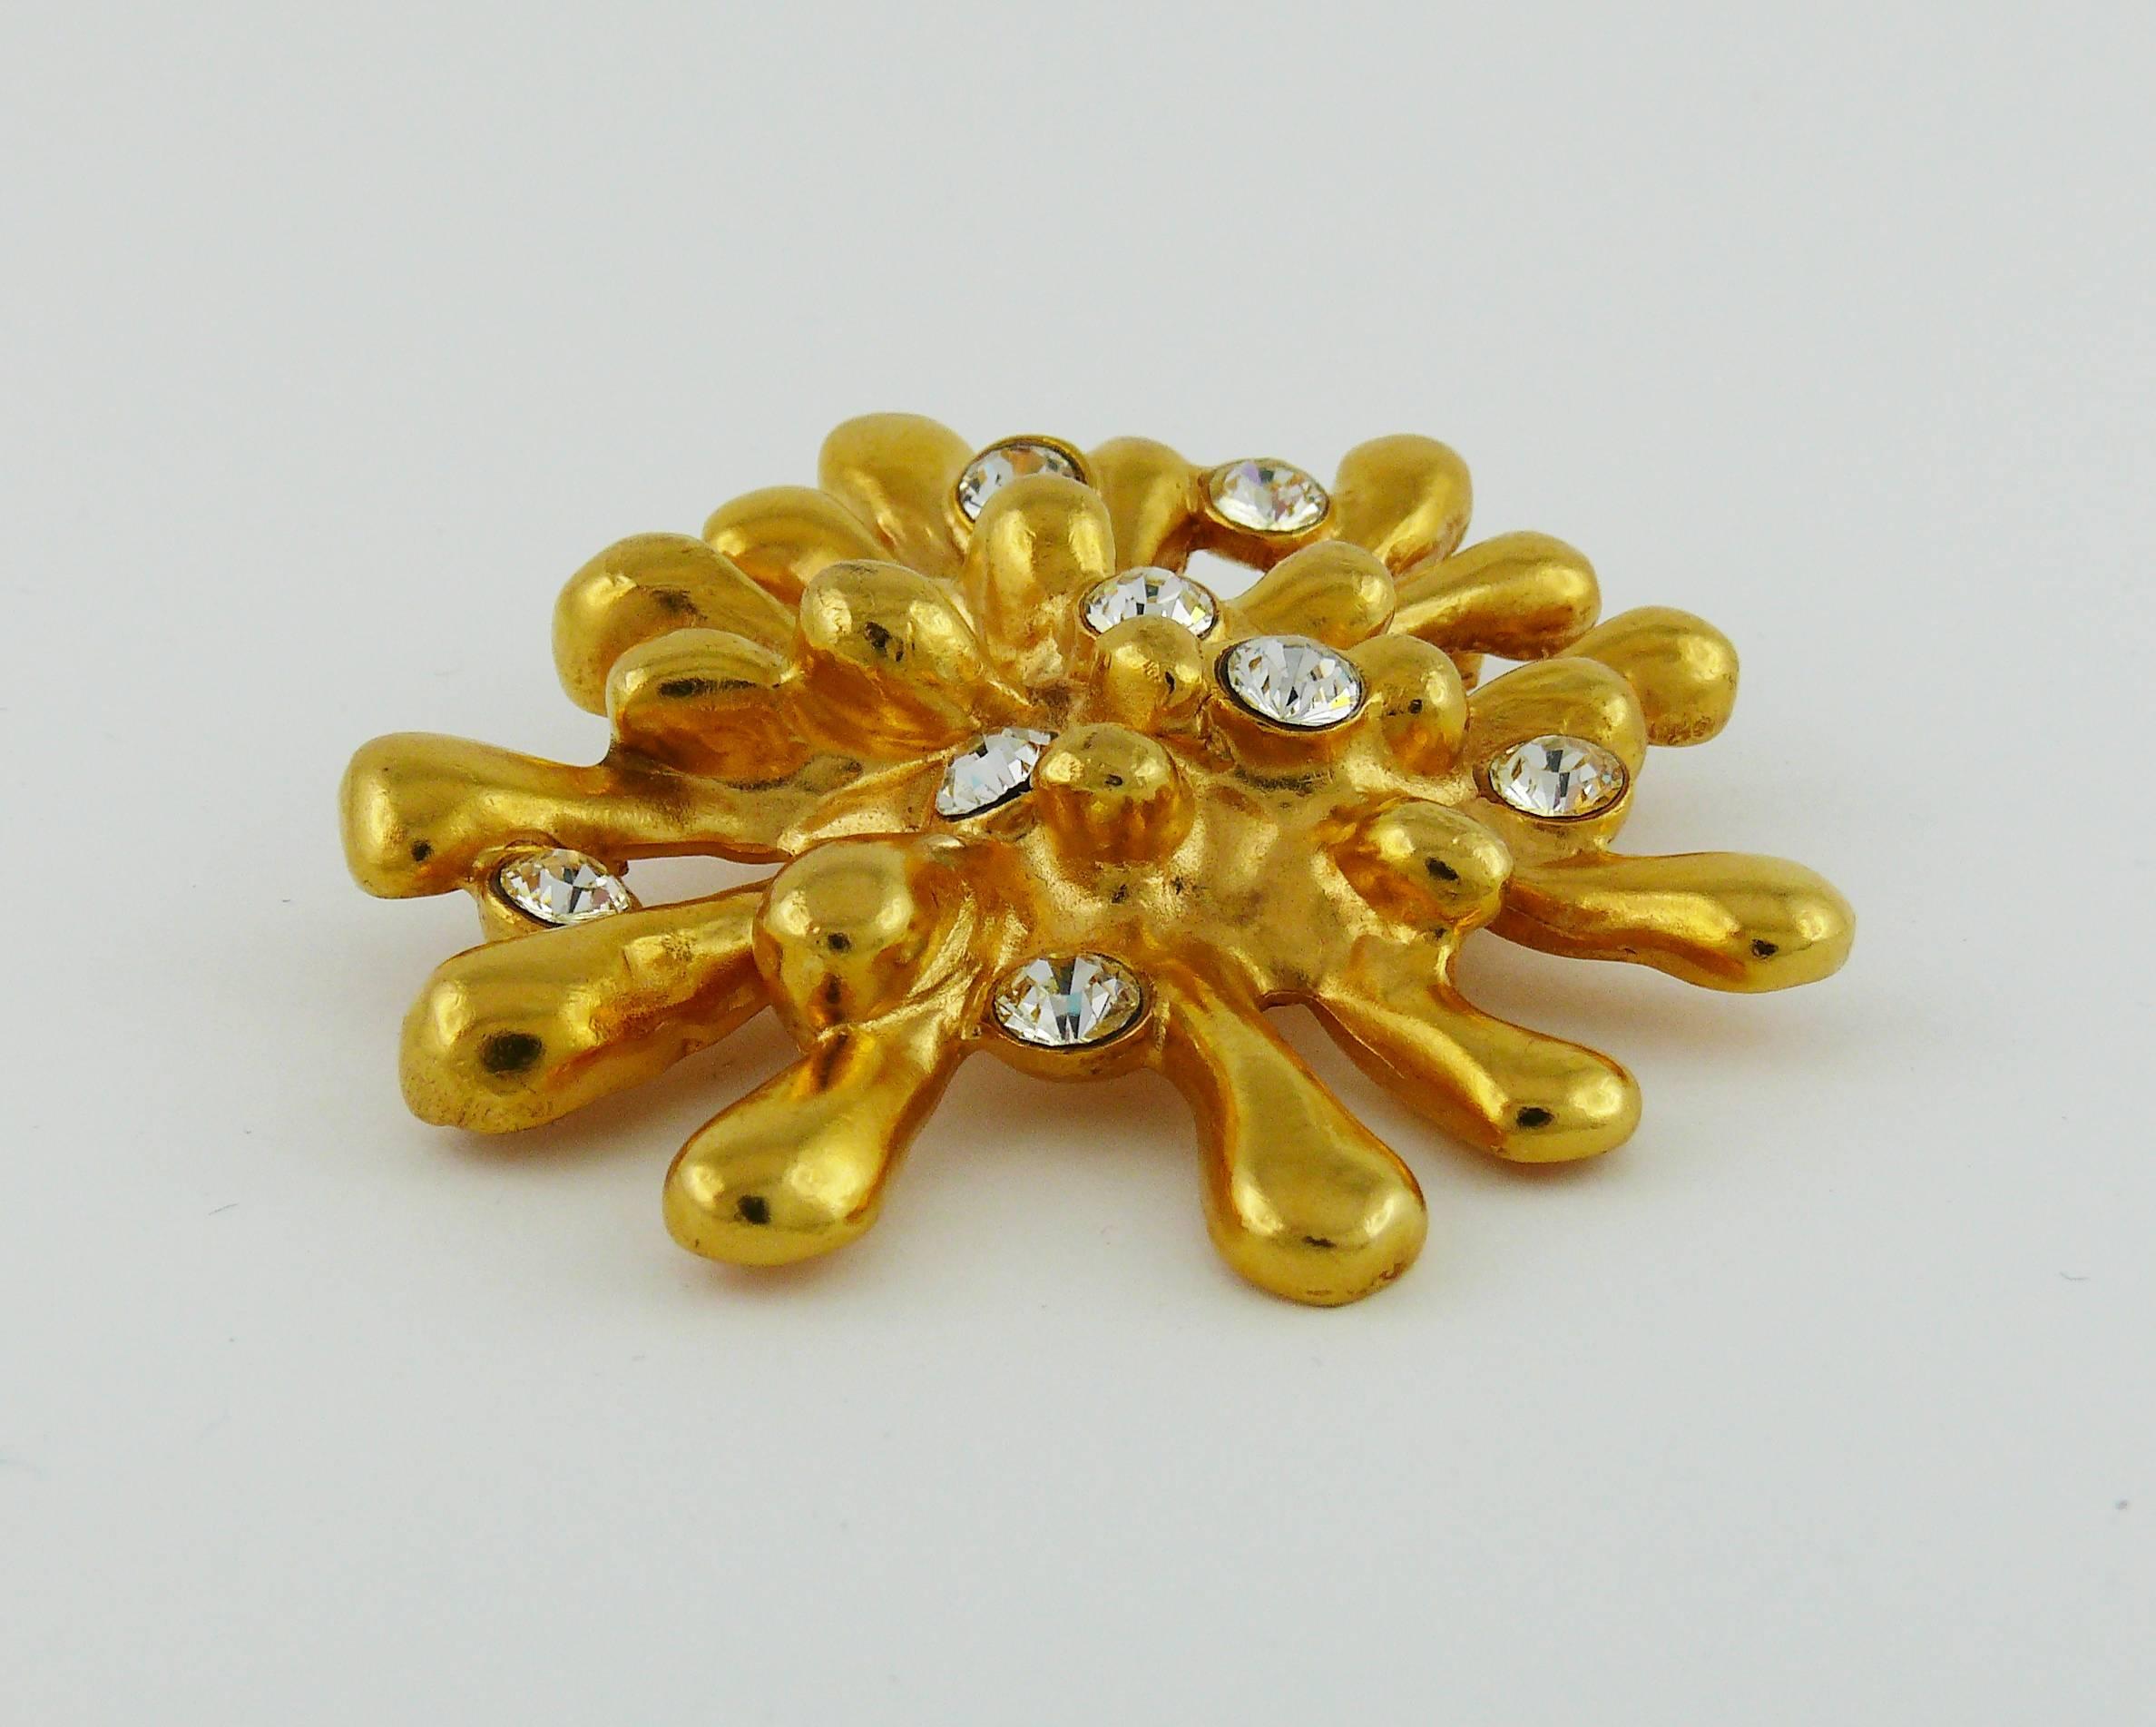 CHRISTIAN LACROIX vintage massive abstract gold tone brooch from the Splash collection with clear crystal embellishement.

Marked CHRISTIAN LACROIX CL Made in France.

JEWELRY CONDITION CHART
- New or never worn : item is in pristine condition